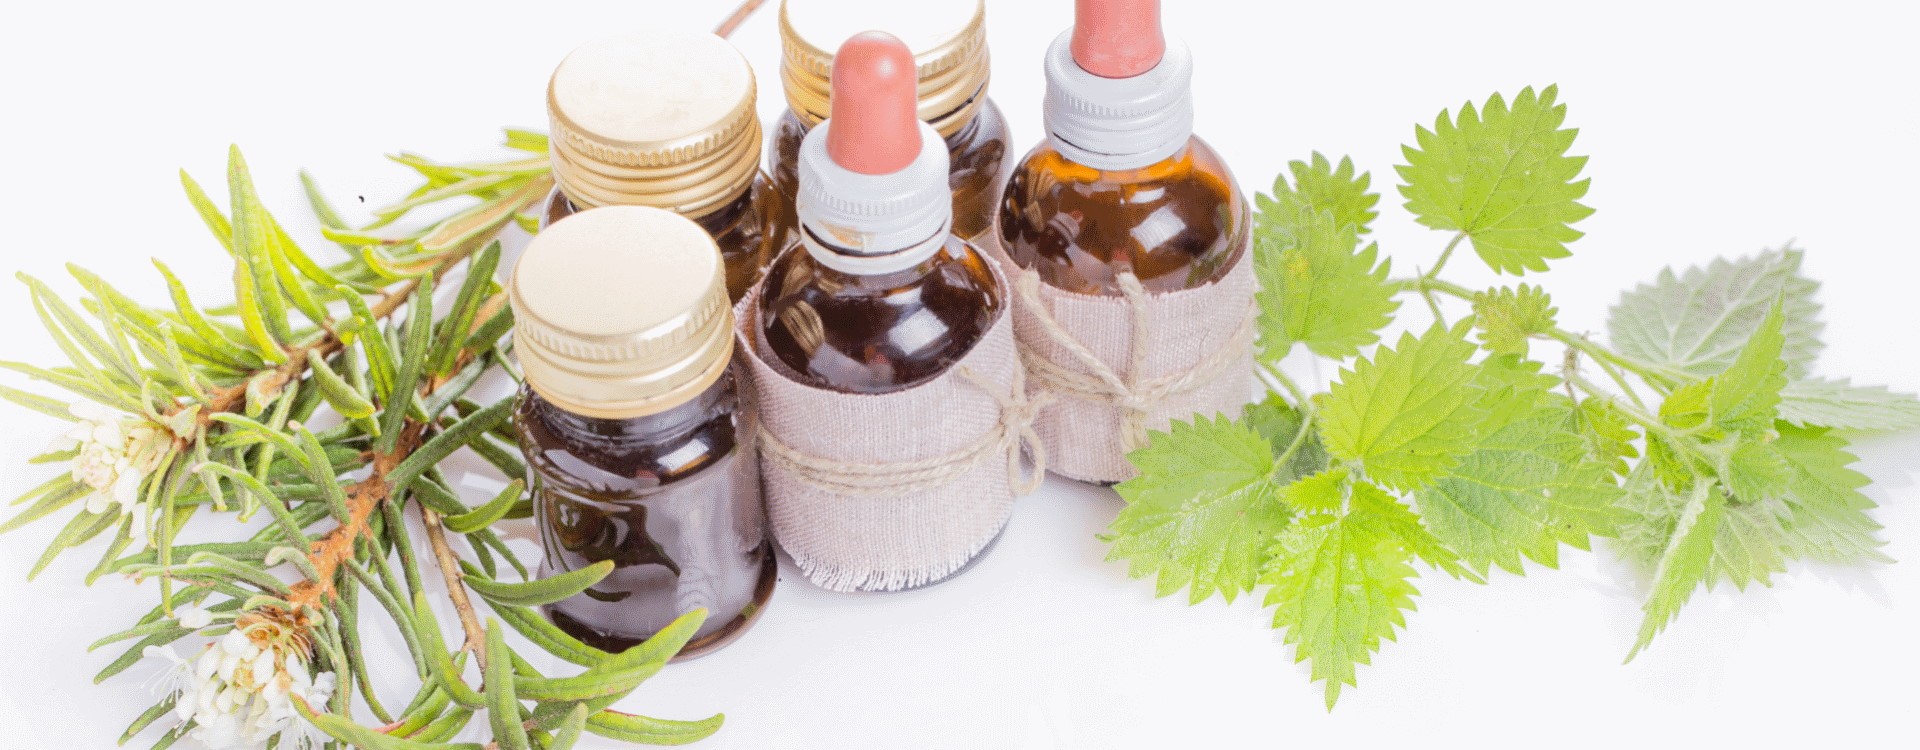 Top 5 - Best Natural Products for Hair Loss